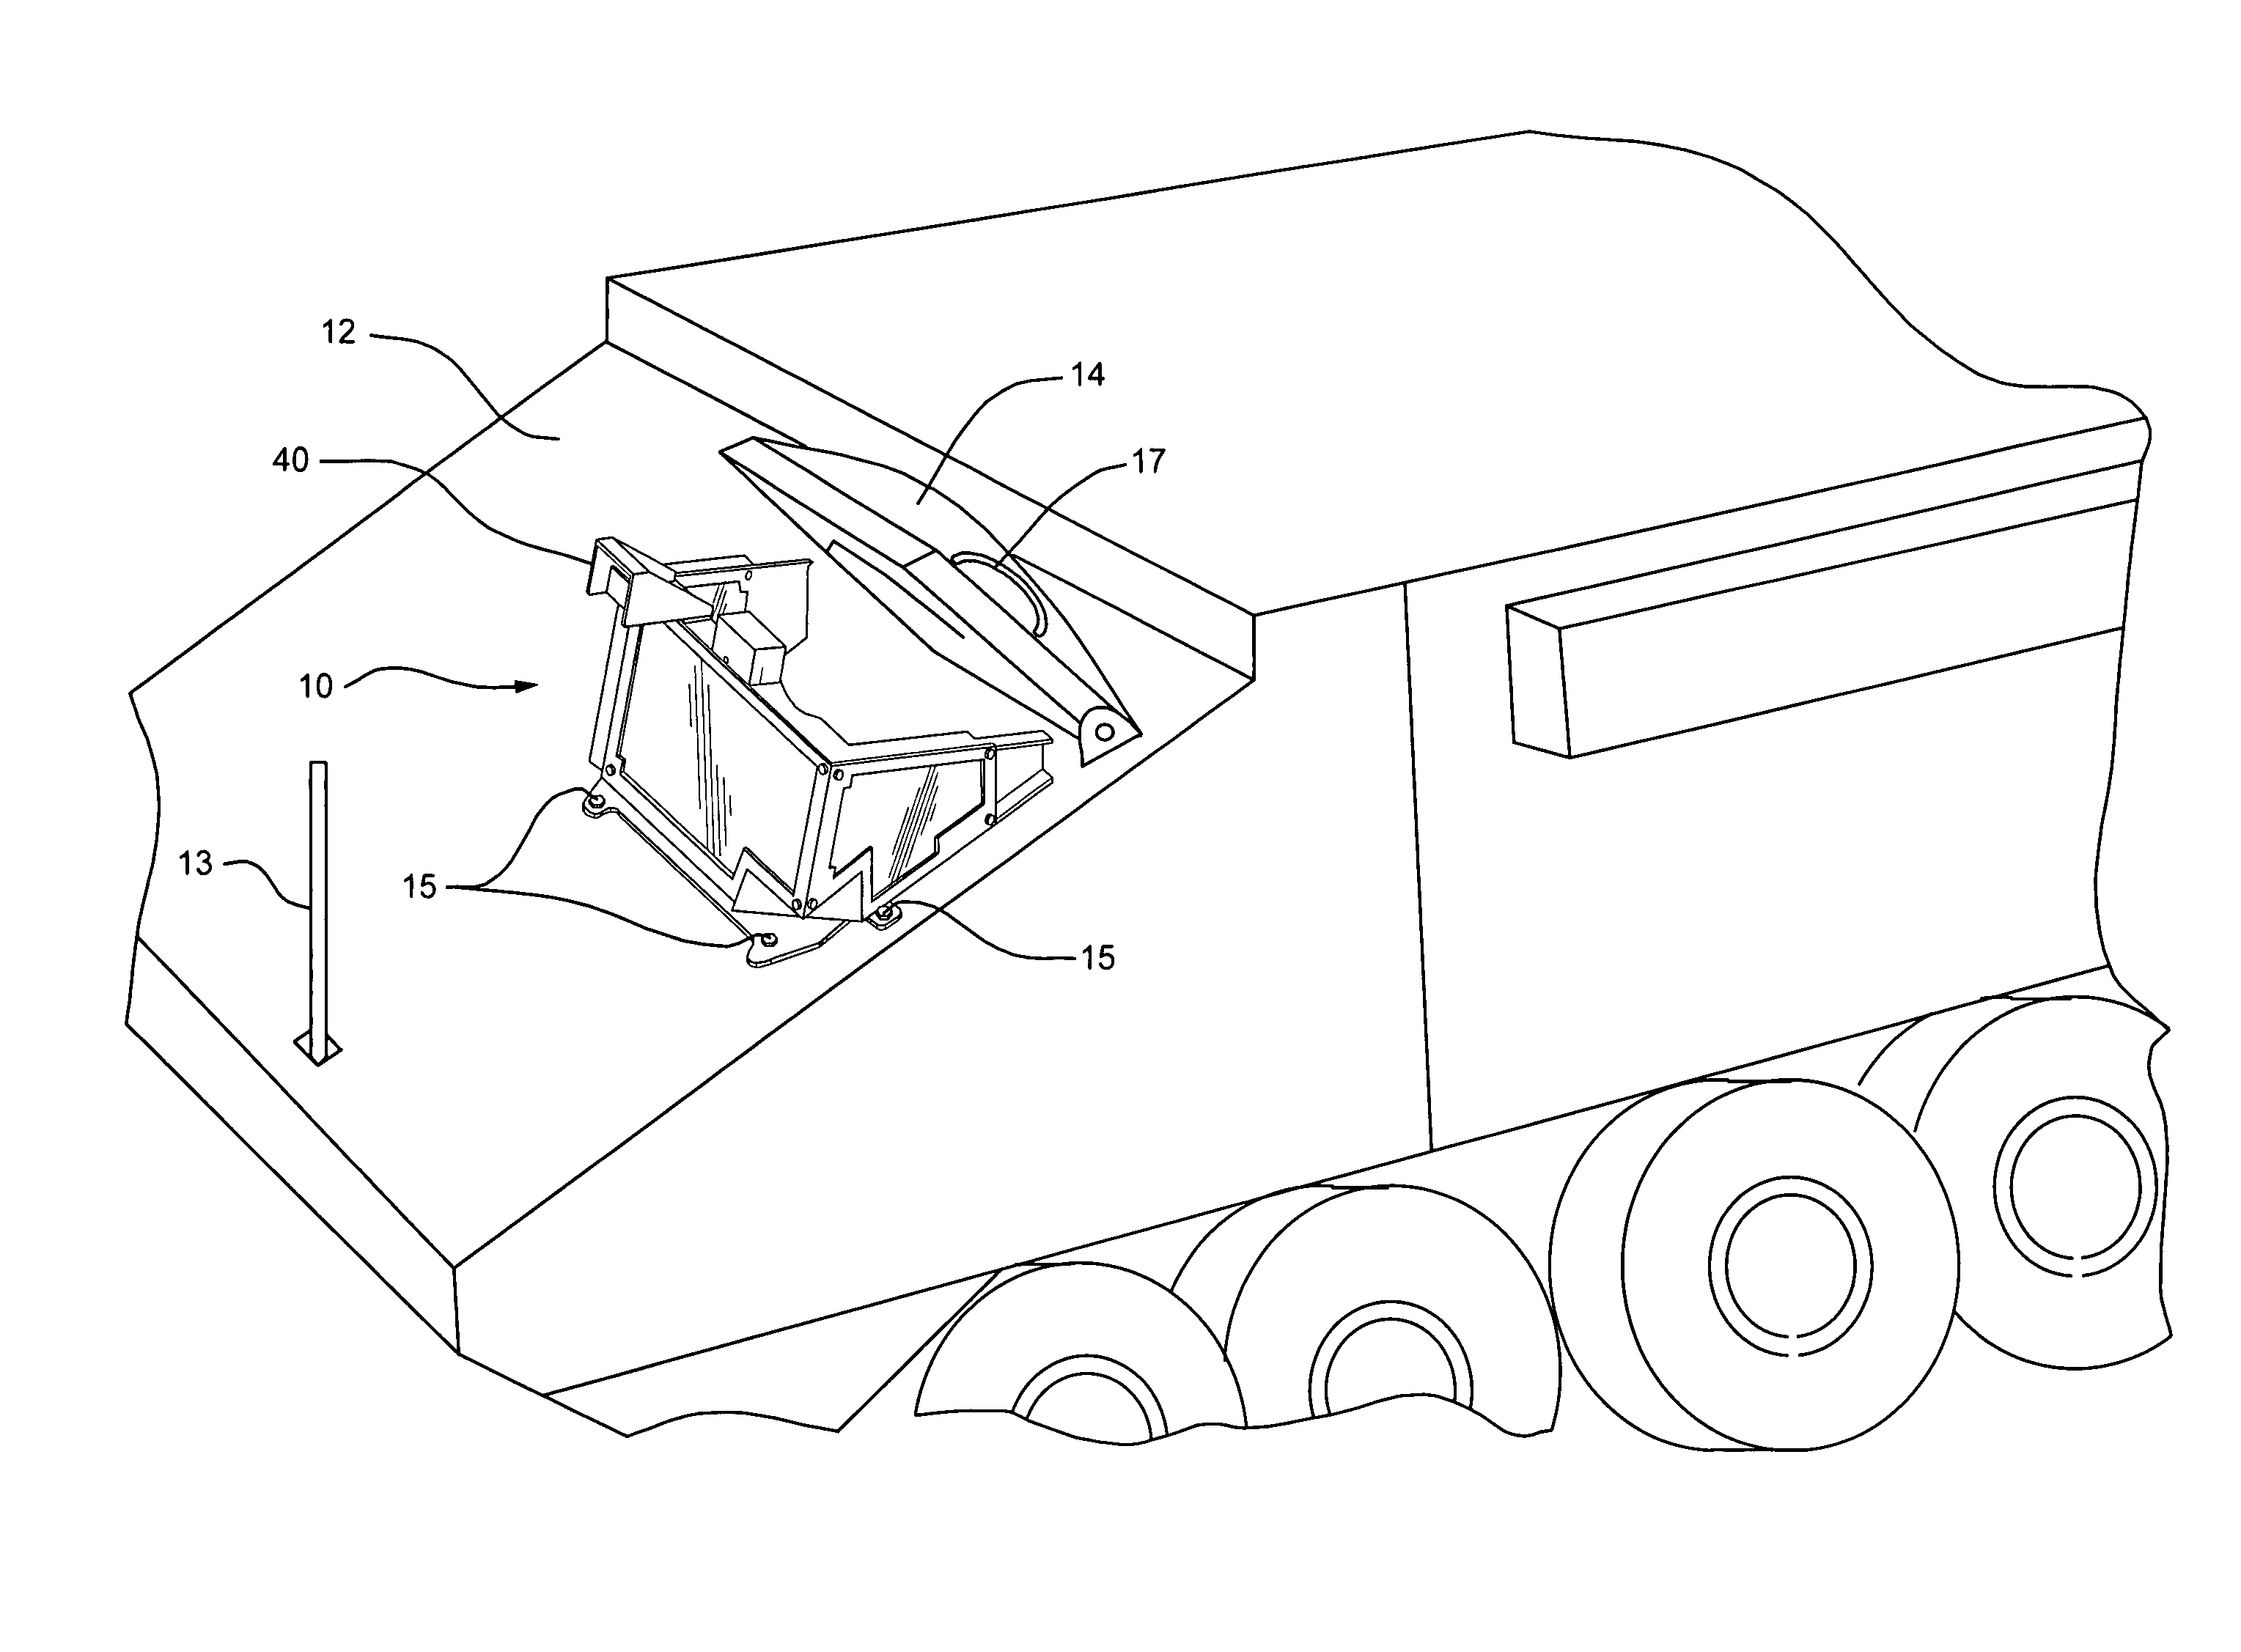 Ballistic armor shield for hatch area of armored vehicle